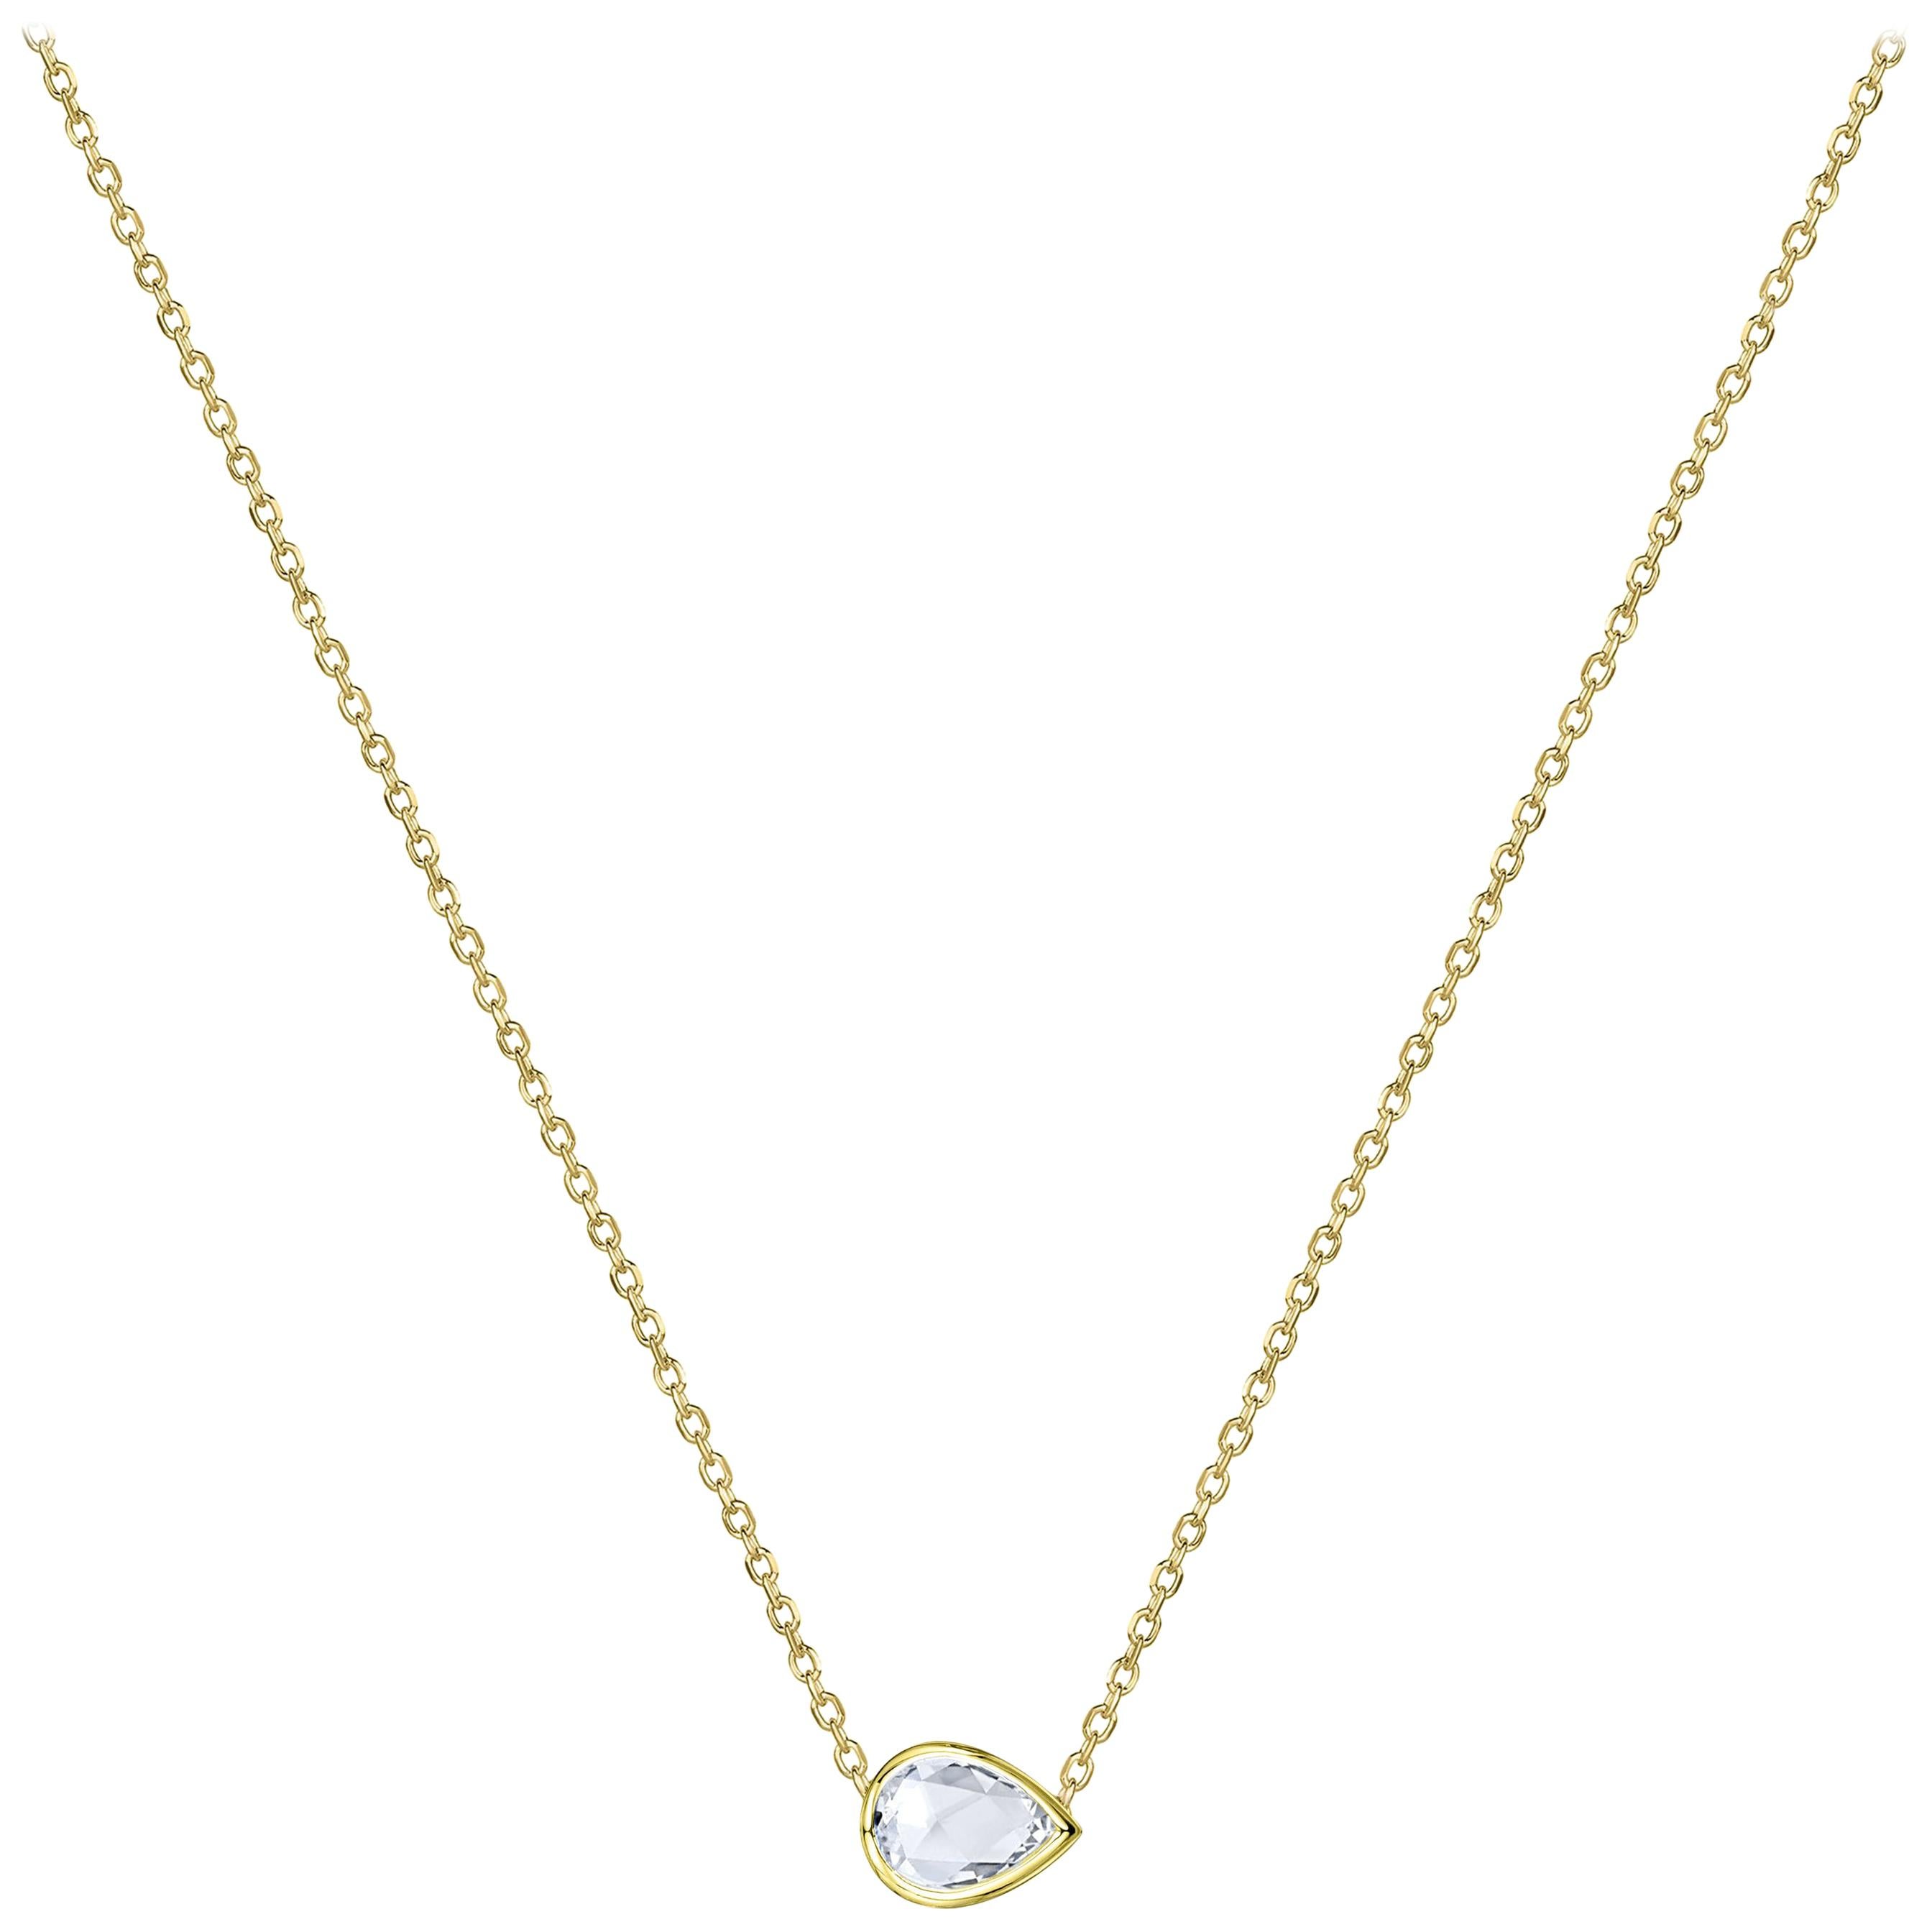 Rock & Divine Day Collection Perfect Pear Rose Cut Necklace in 18k Gold 0.70ct